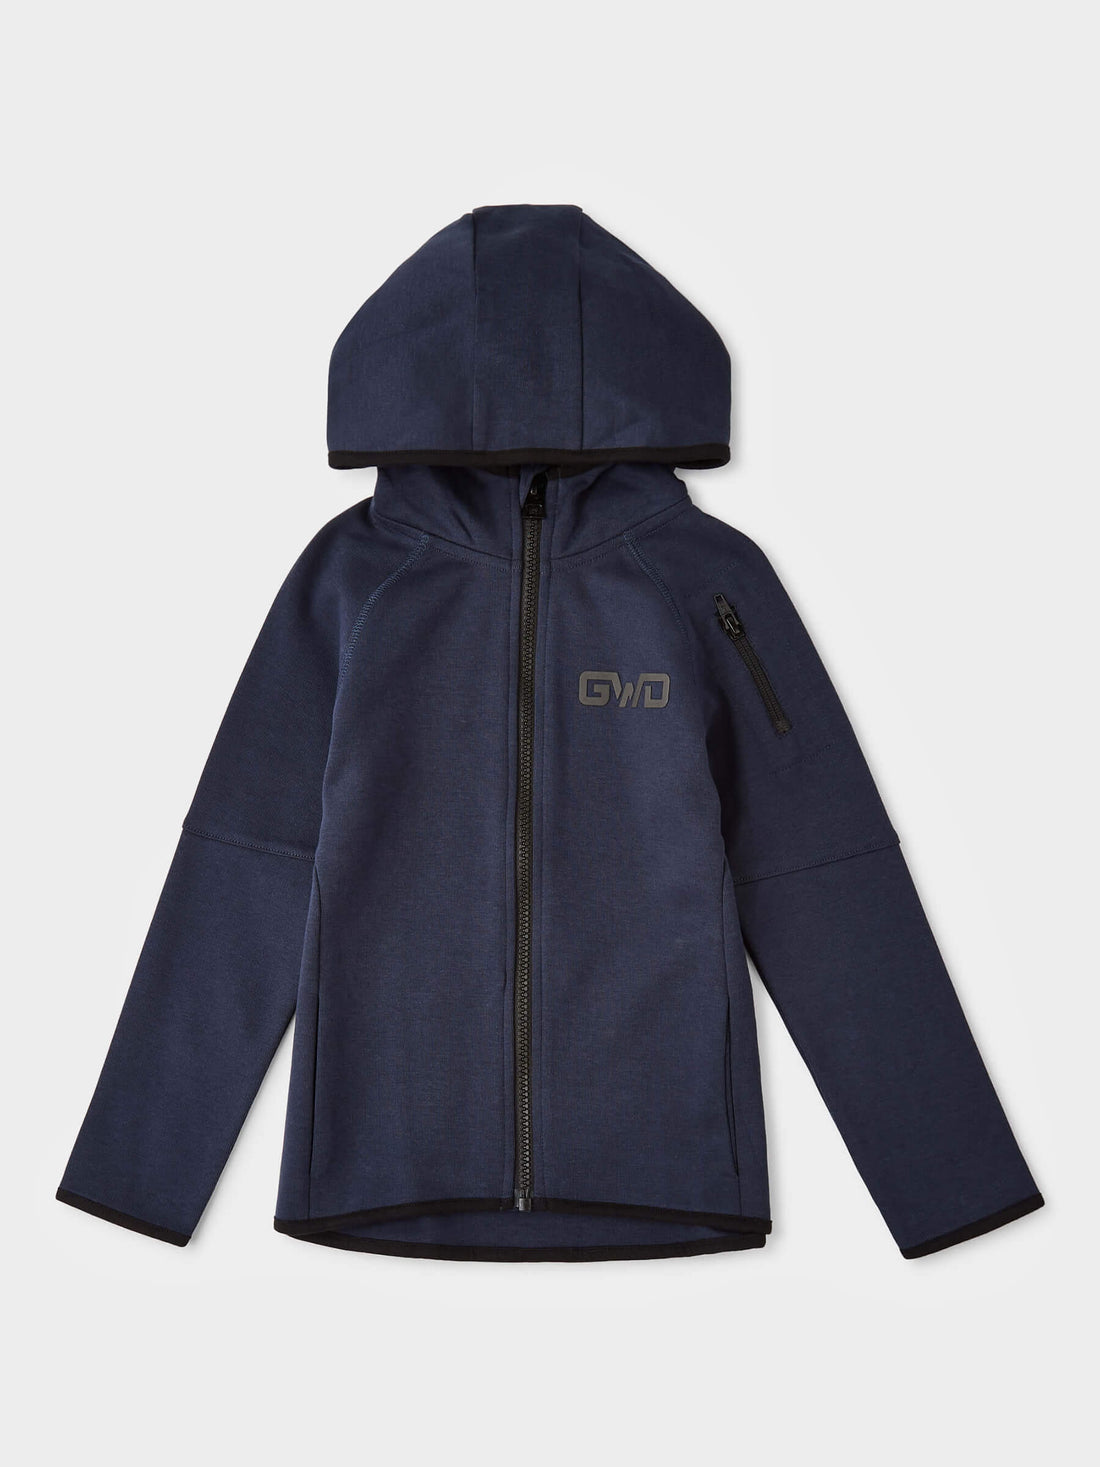 Aiden Hooded Tracksuit Top | GWD Fashion